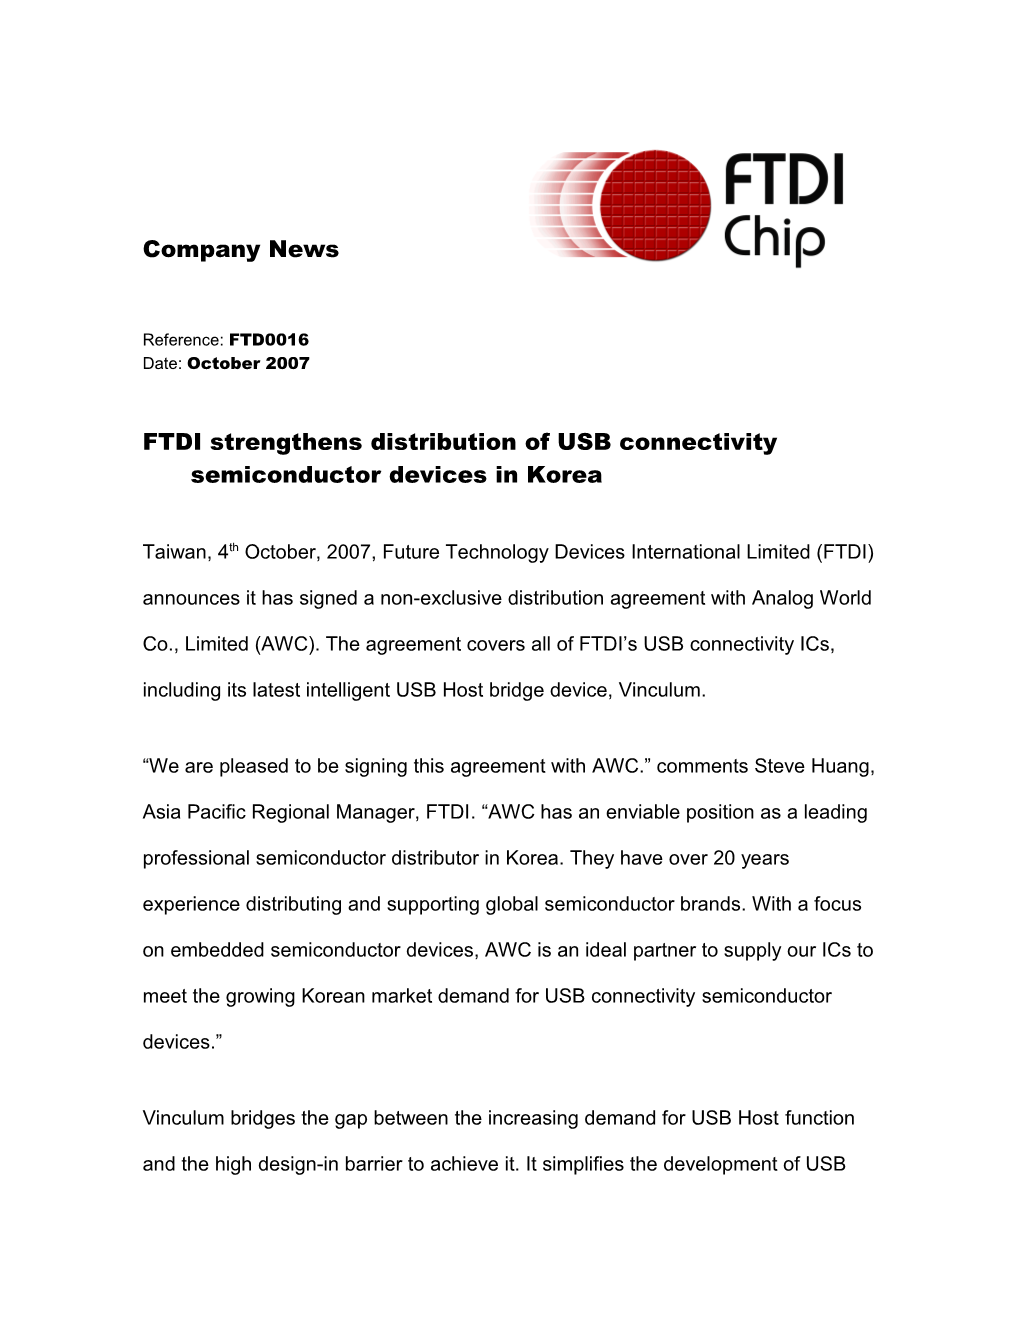 FTDI Strengthens Distribution of USB Connectivity Semiconductor Devices in Korea